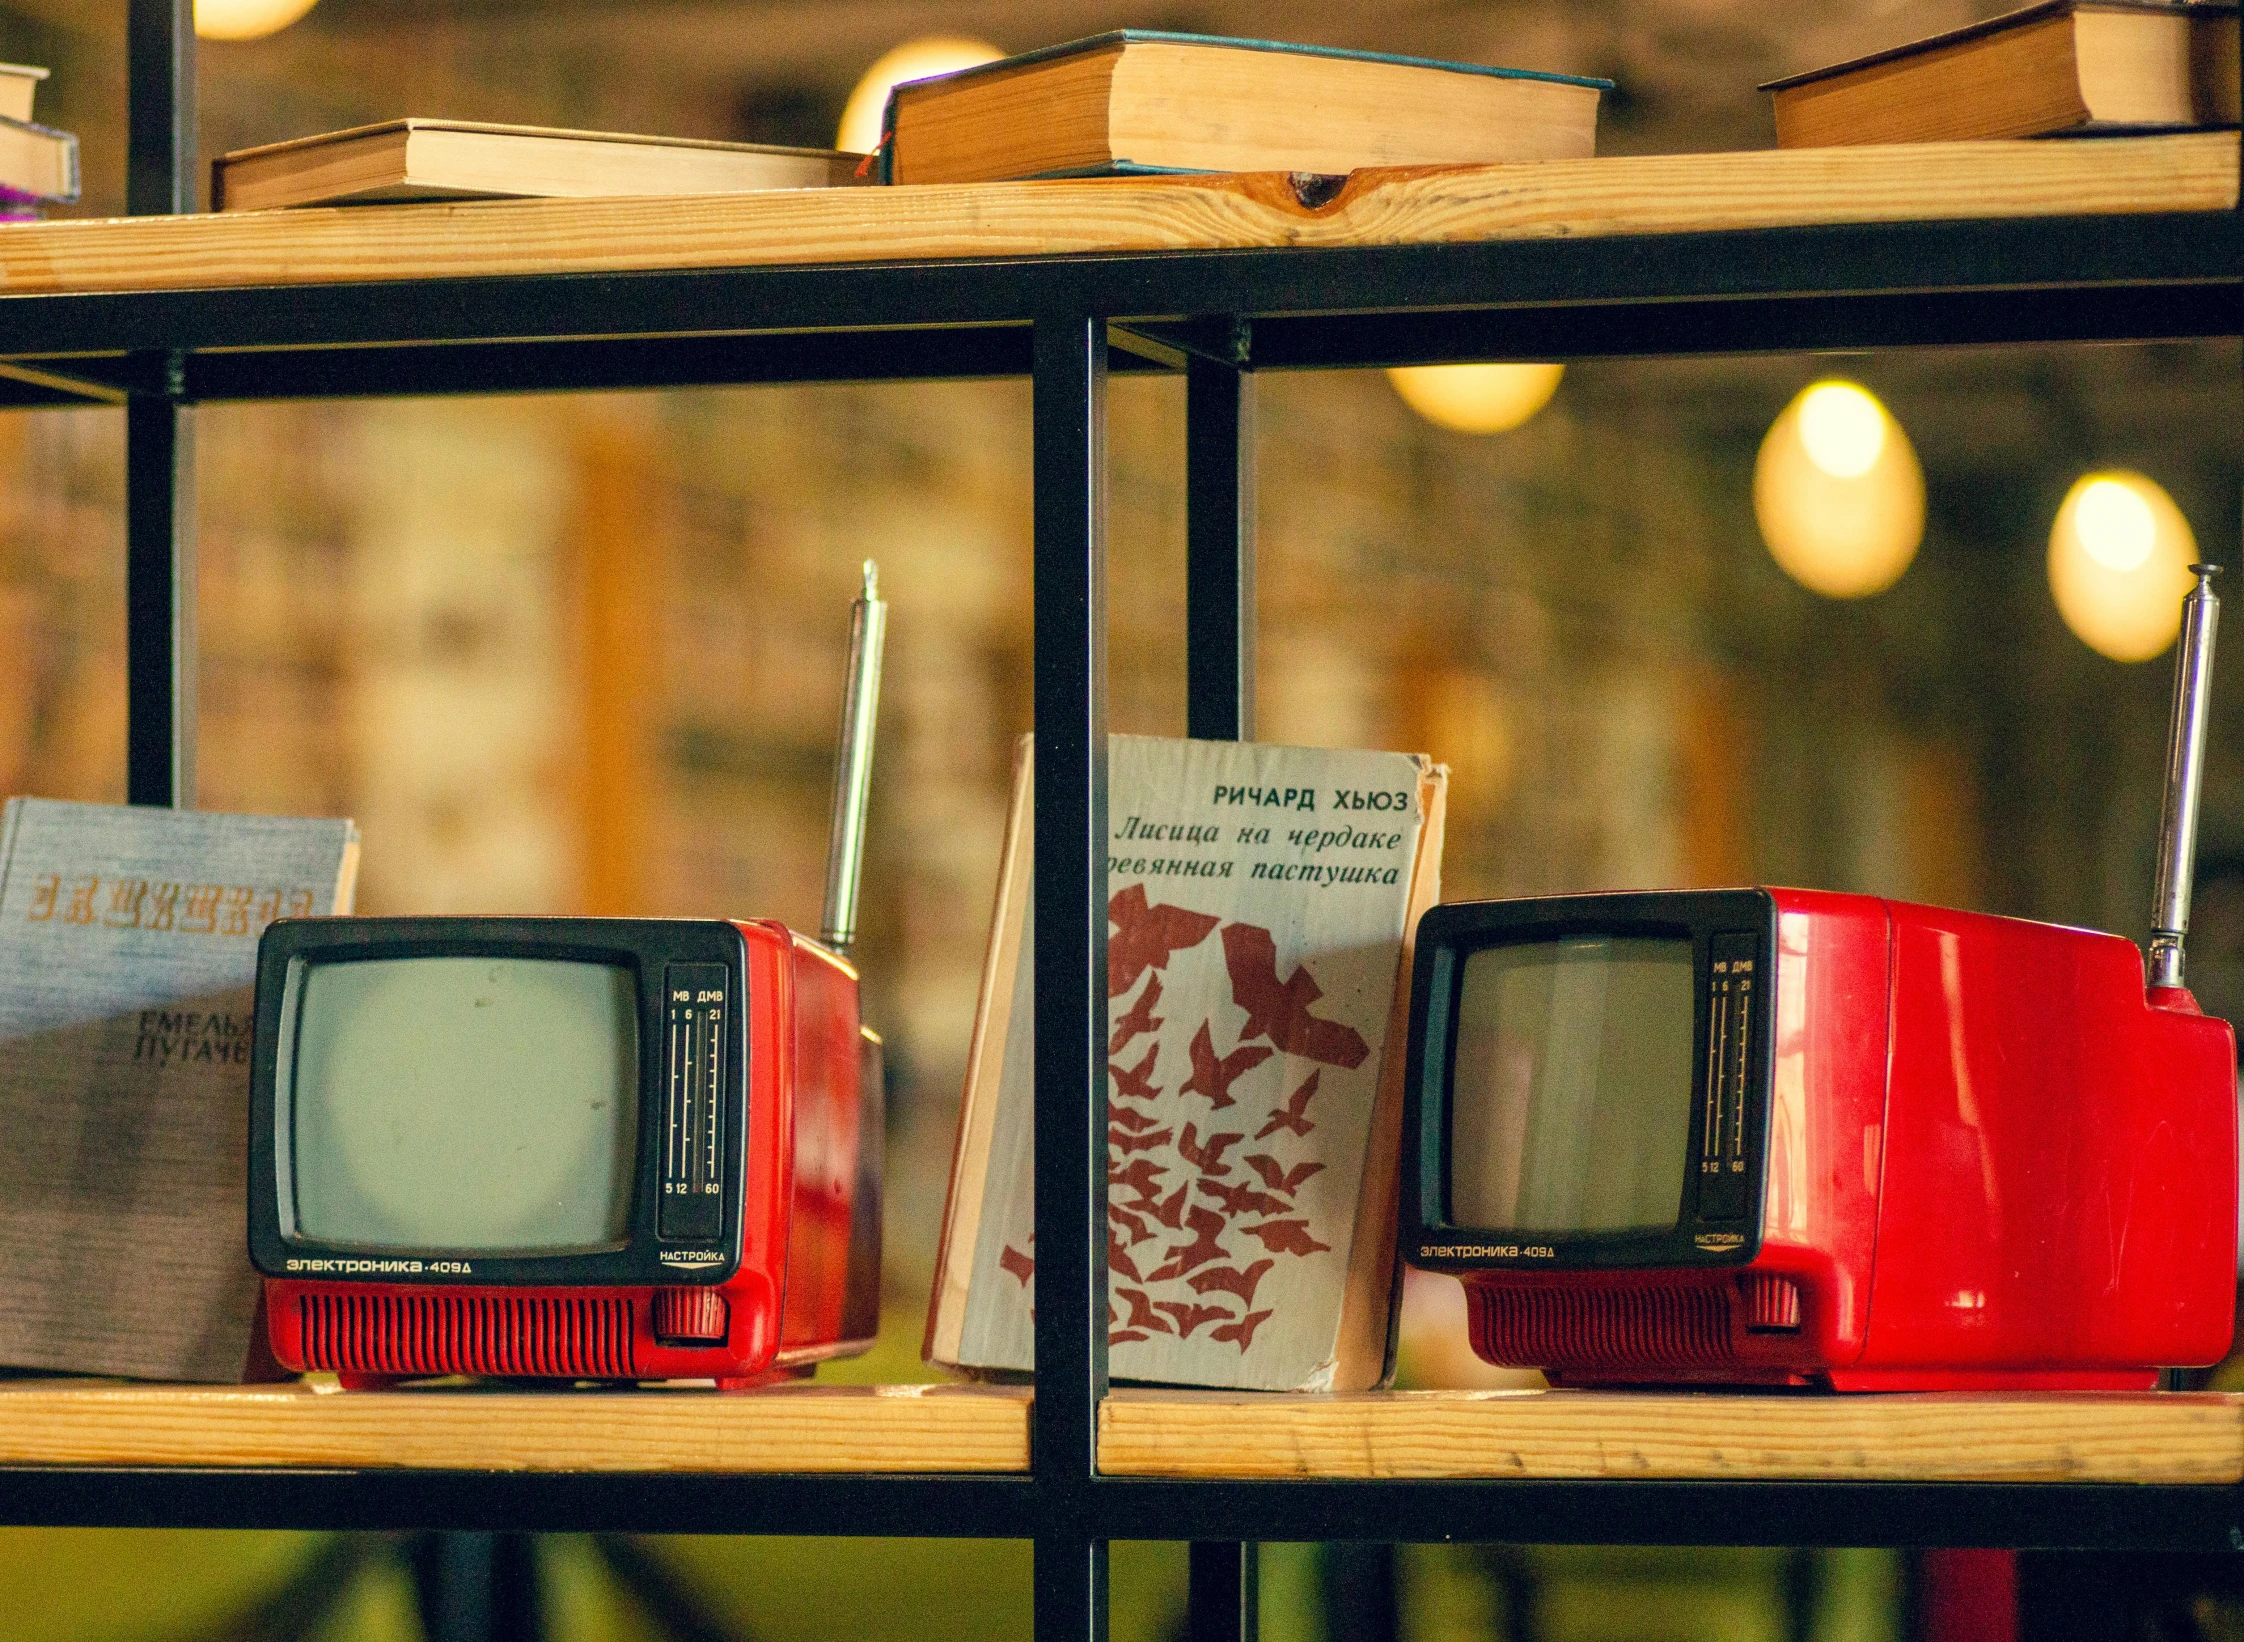 a row of old televisions sit on display in a glass case